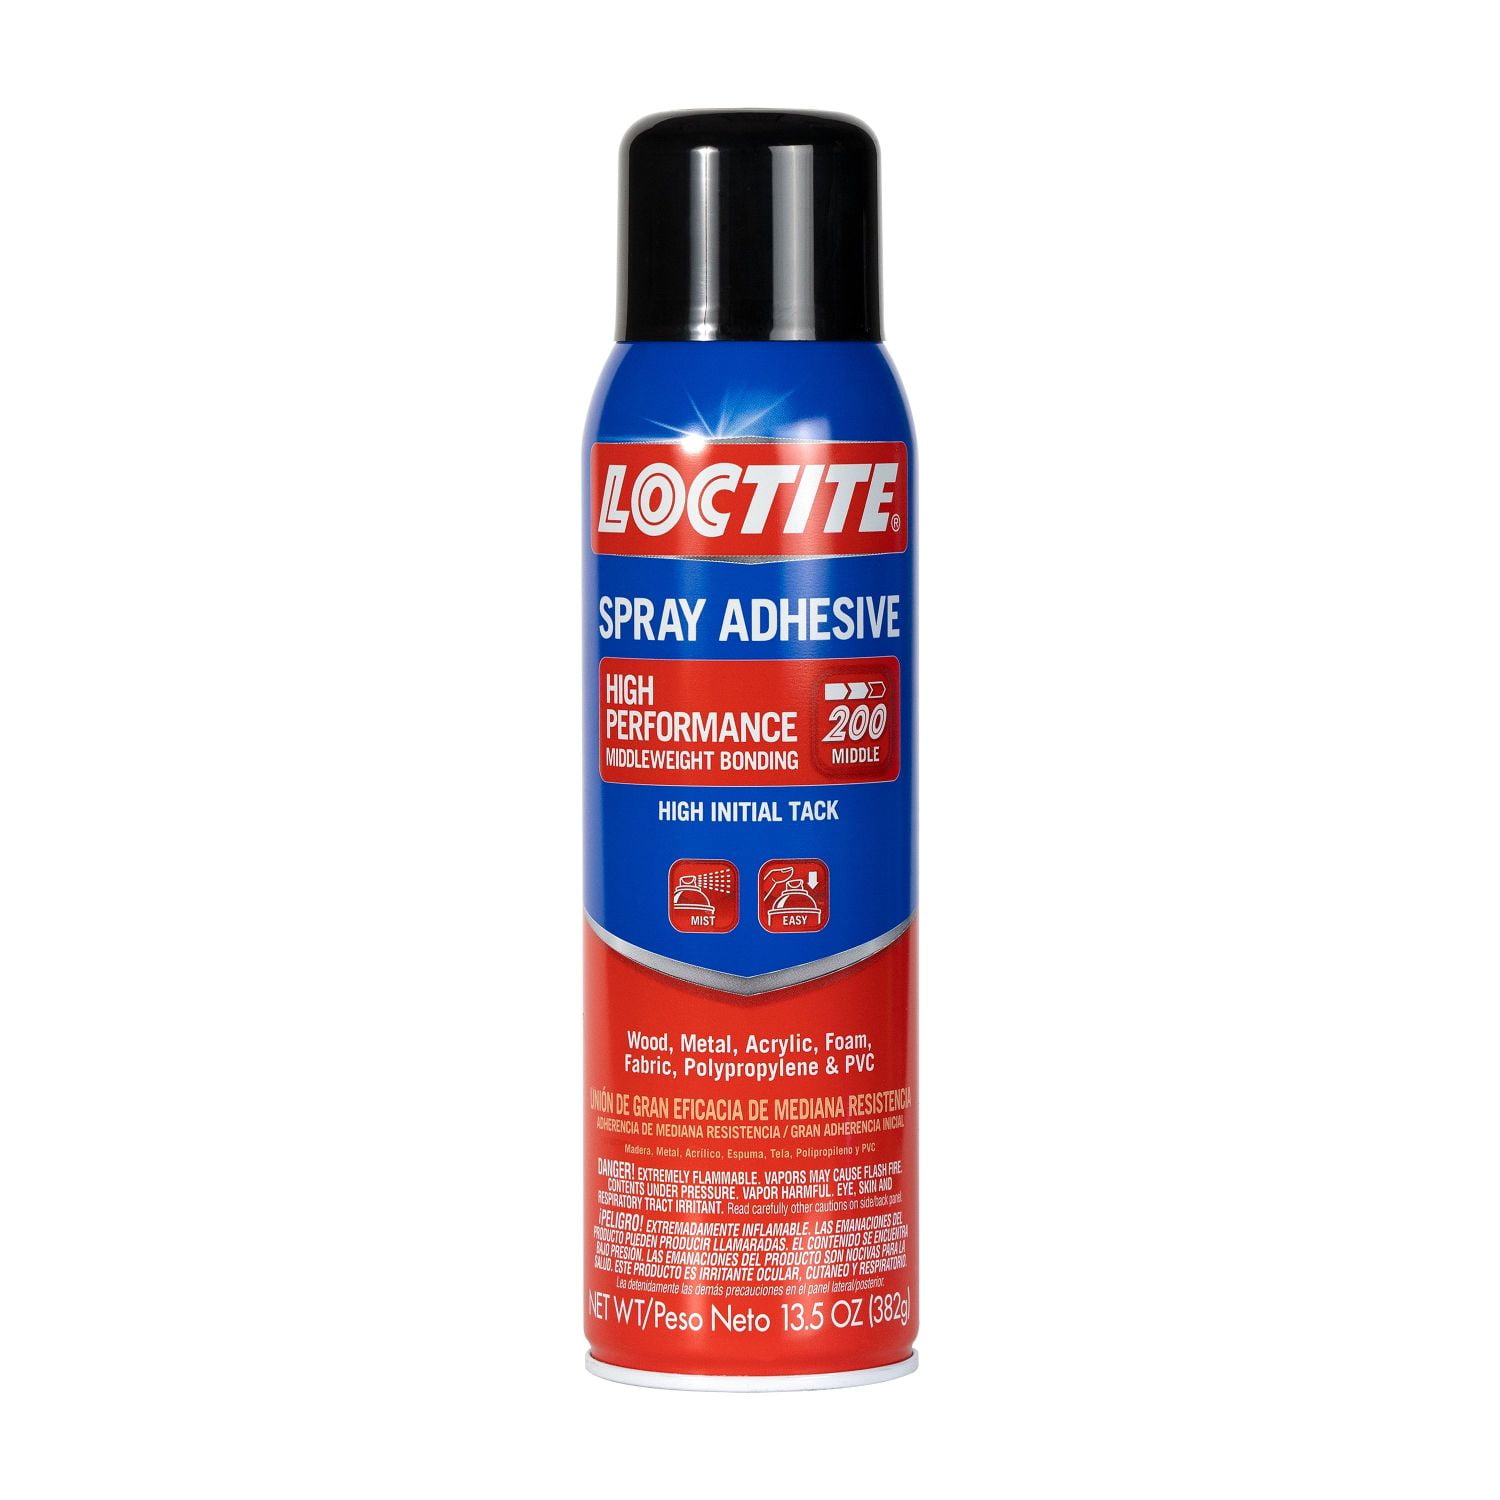 Loctite High Performance Spray Adhesive, 1, Clear 13.5 oz Can